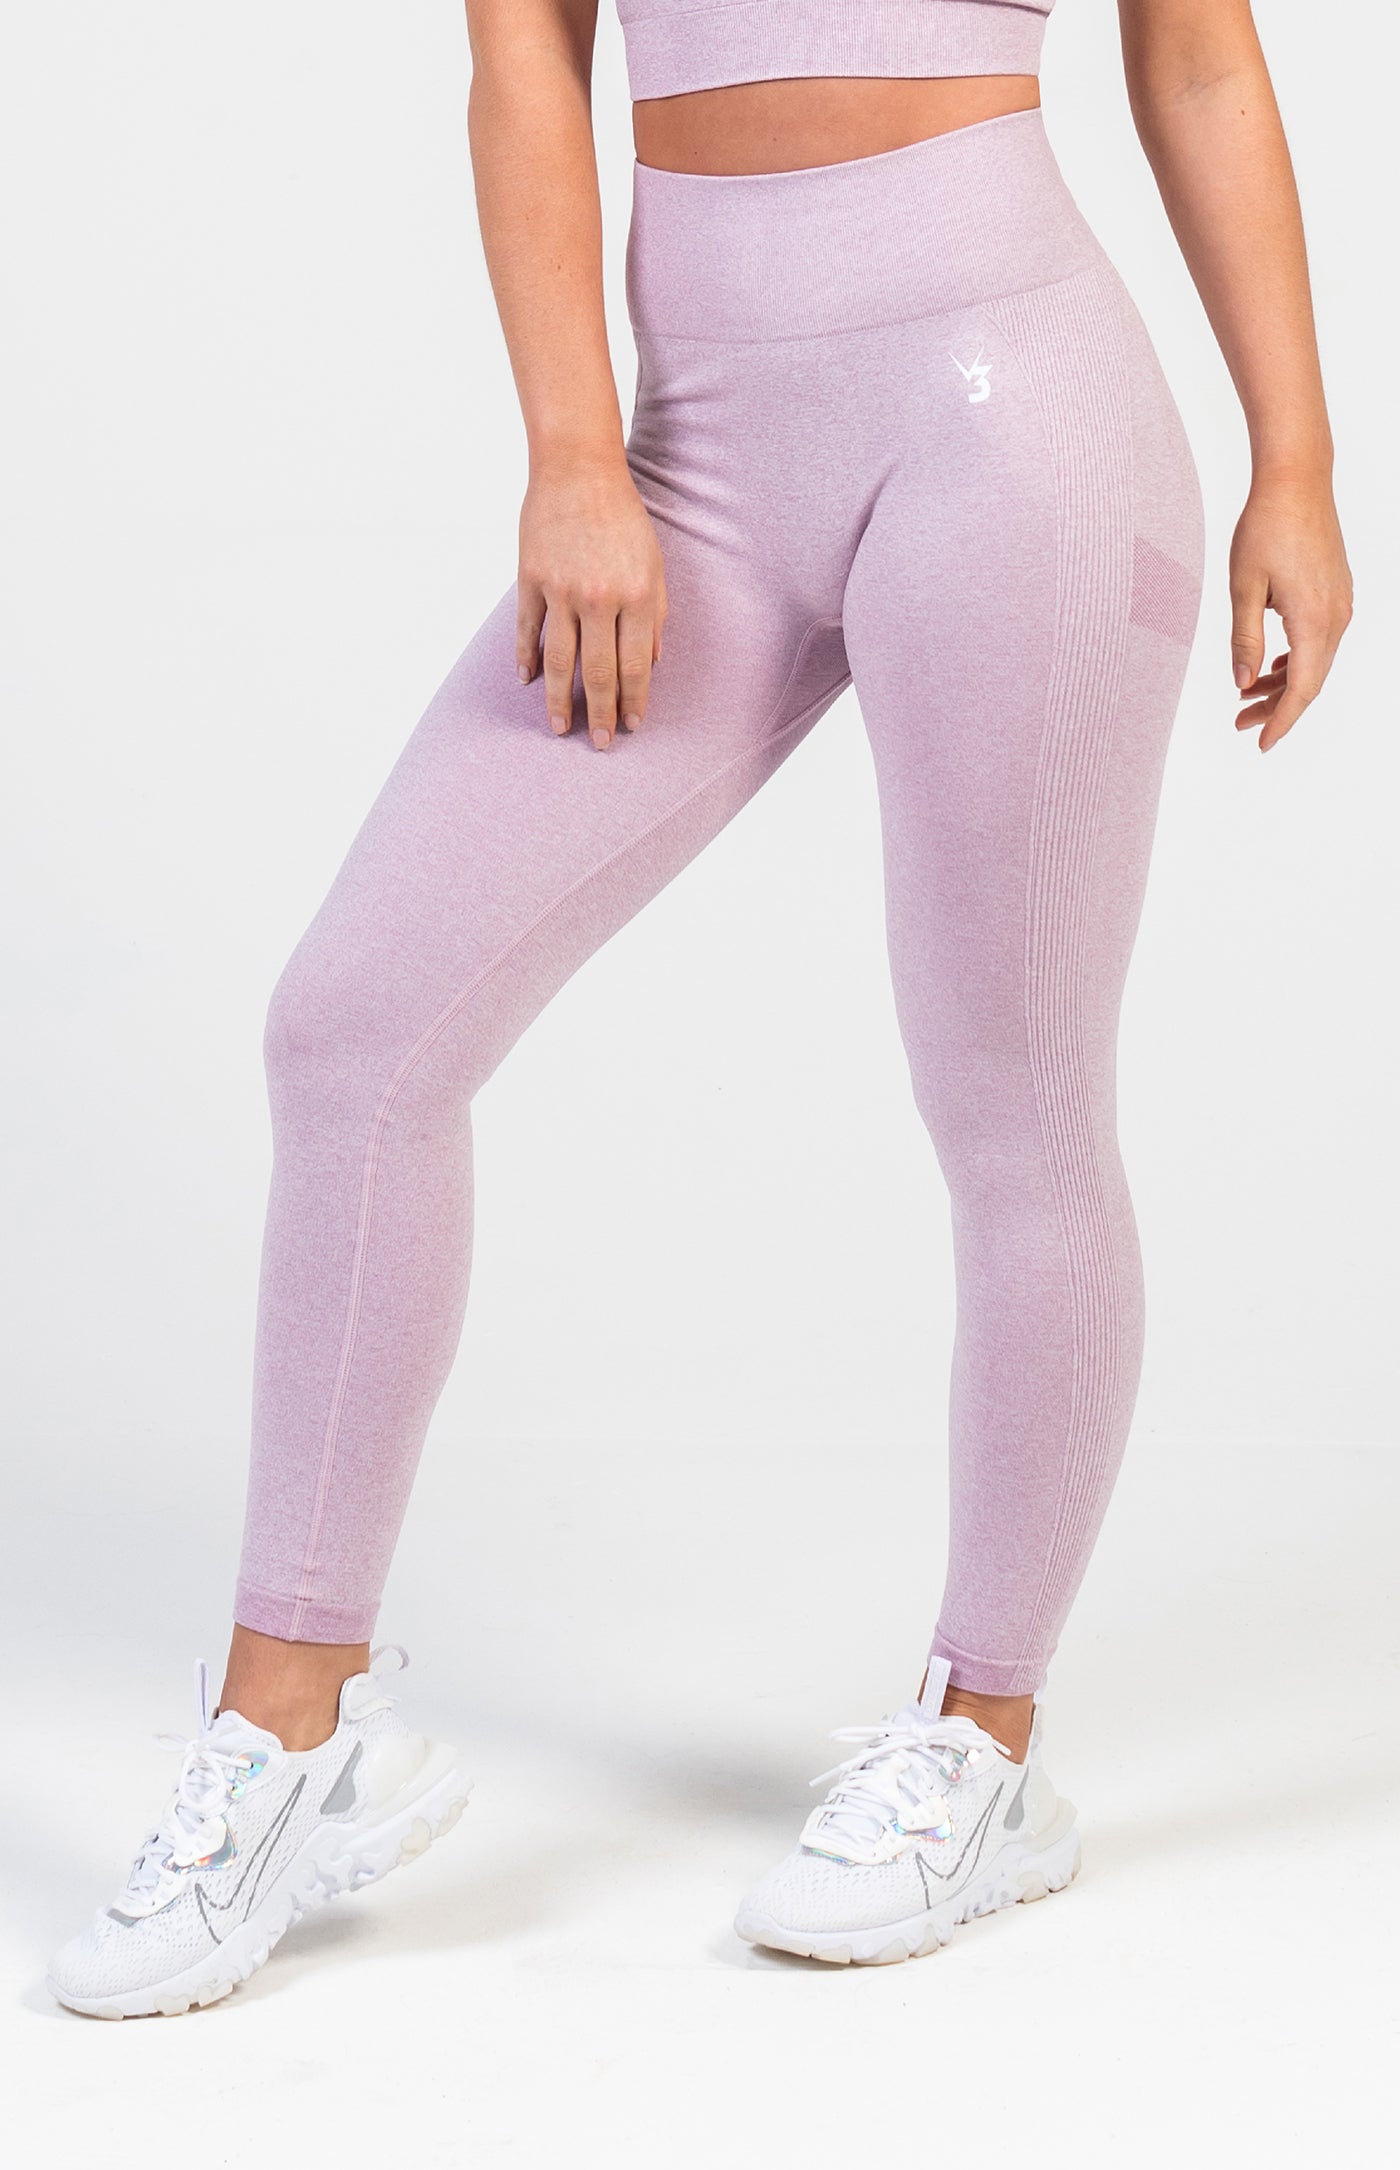 V3 Apparel Women's Define seamless scrunch bum shaping high waisted leggings in lilac purple – Squat proof sports tights for Gym workouts training, Running, yoga, bodybuilding and bikini fitness.